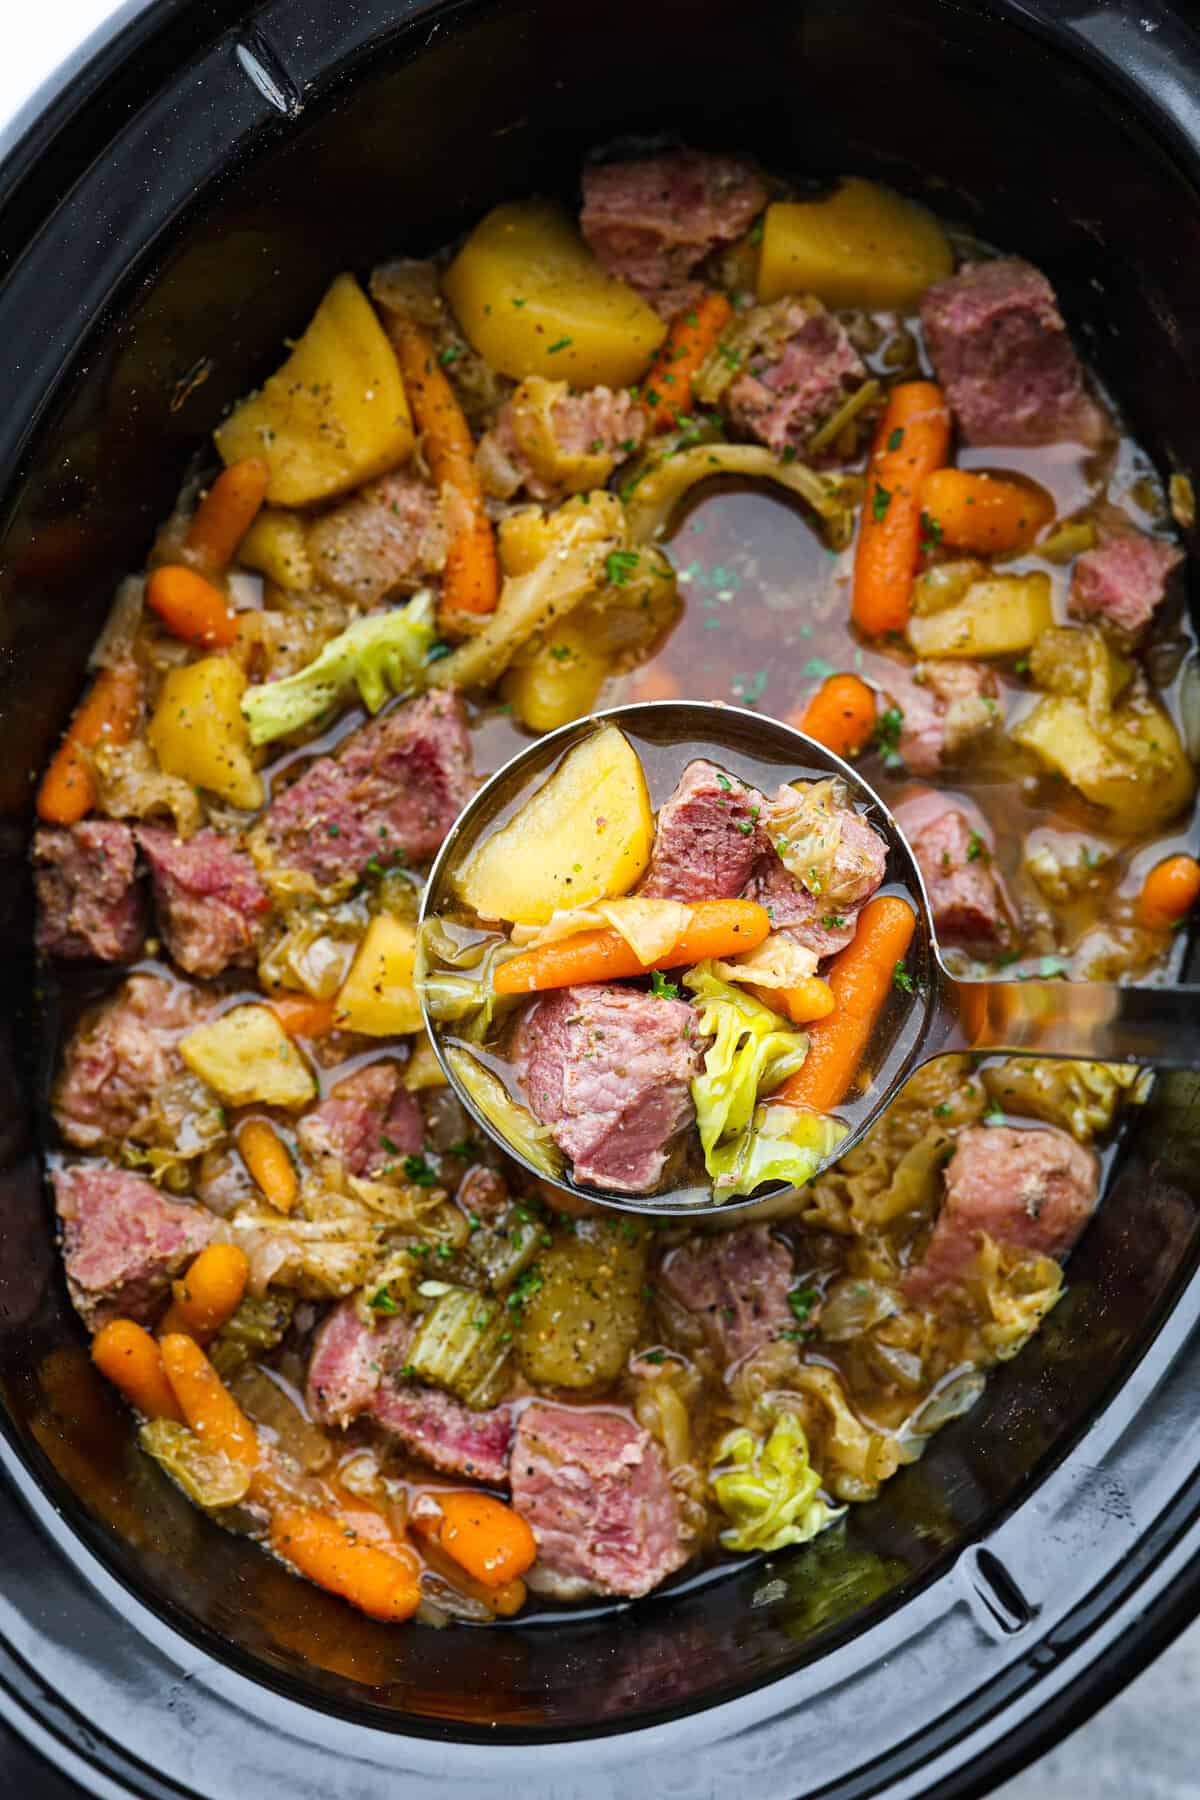 Beef & Stout casserole in the slow cooker today. Pretty tasty very rich! :  r/slowcooking